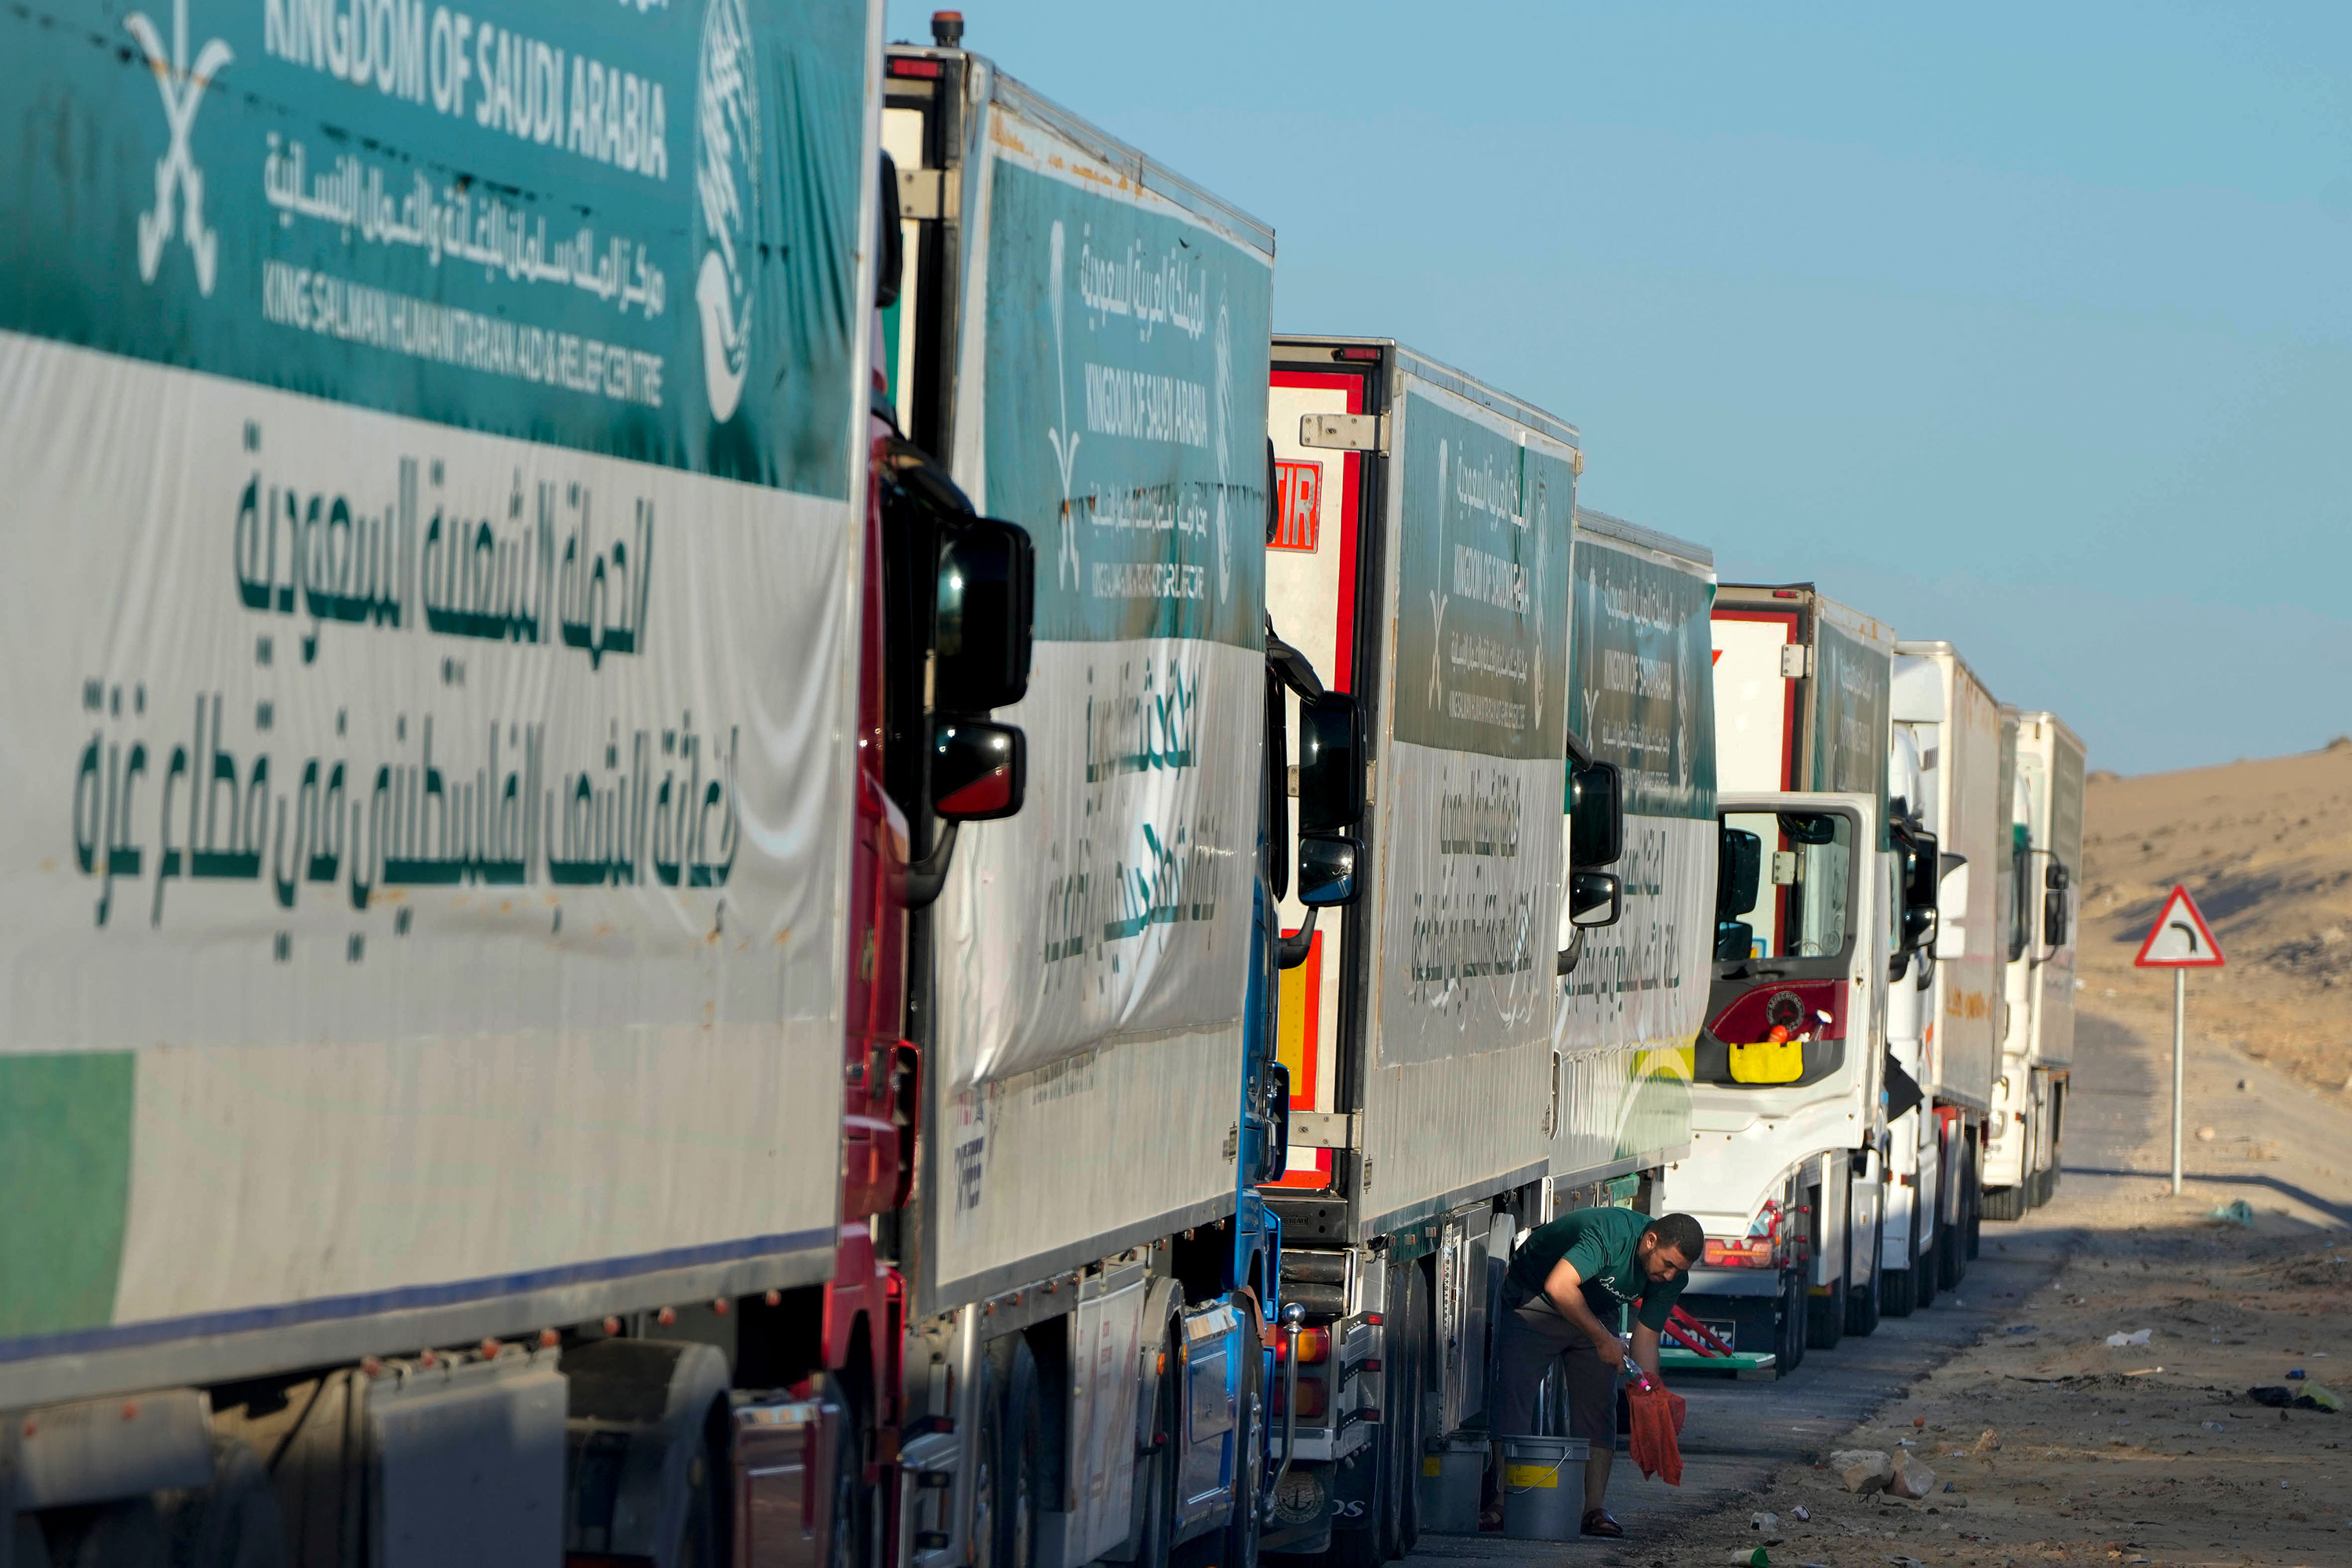 Trucks carrying humanitarian aid line up near the Rafah crossing into Gaza from Egypt on Wednesday.